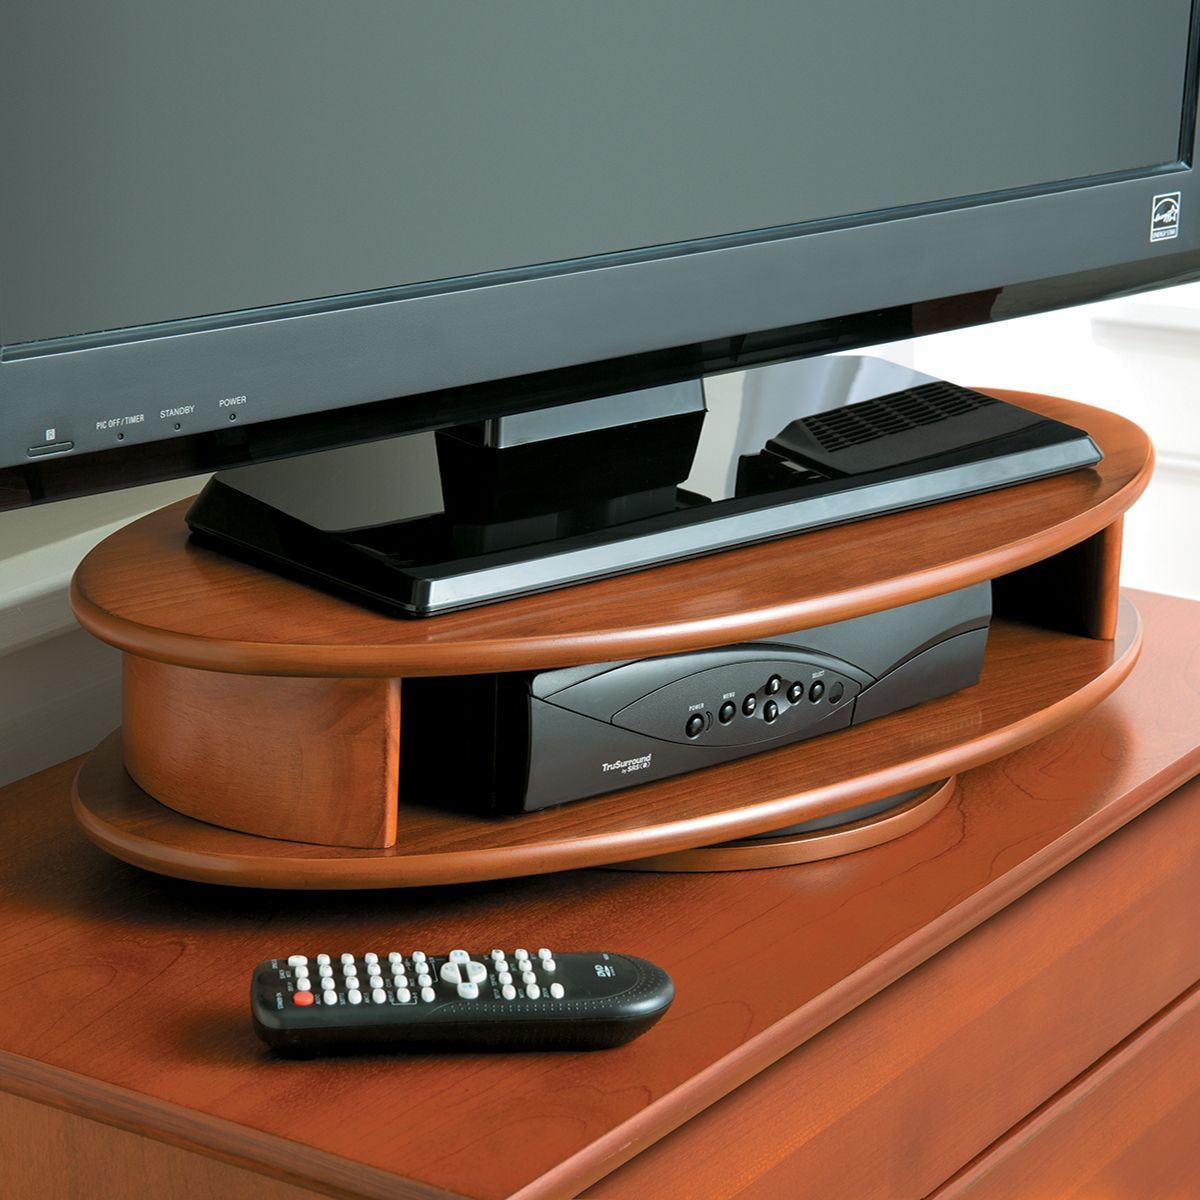 Oval Tv Swivel Stand | Small Tv Stand, Swivel Tv, Swivel With Oval Tv Stands (View 10 of 15)